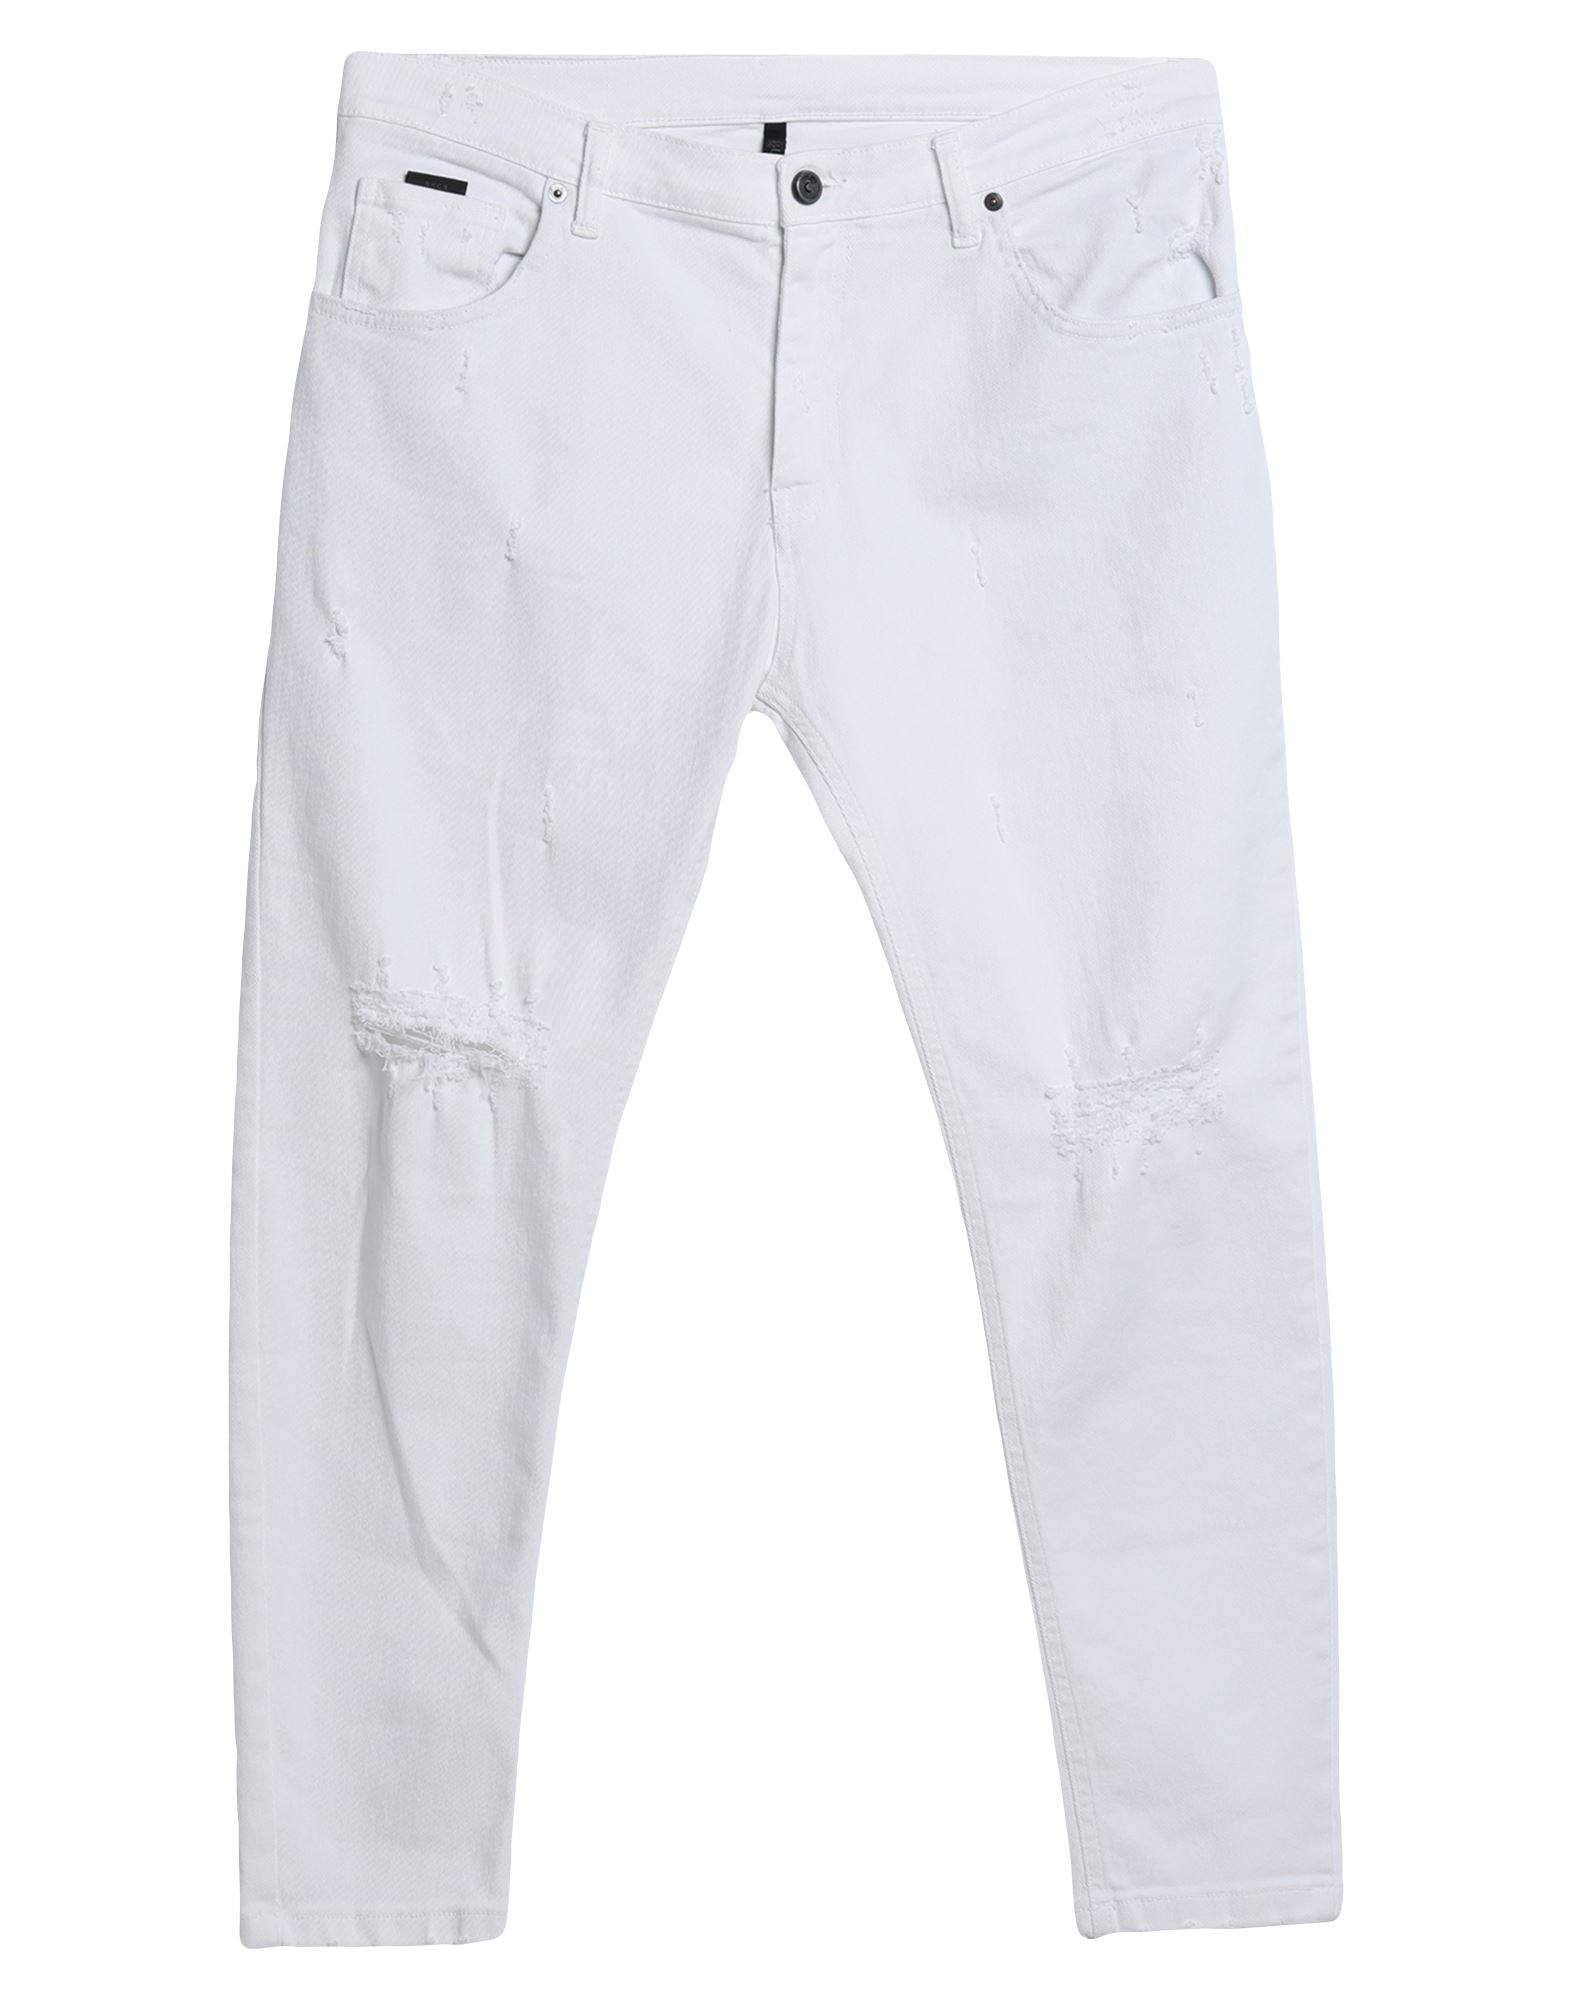 Black Circus Jeans In White